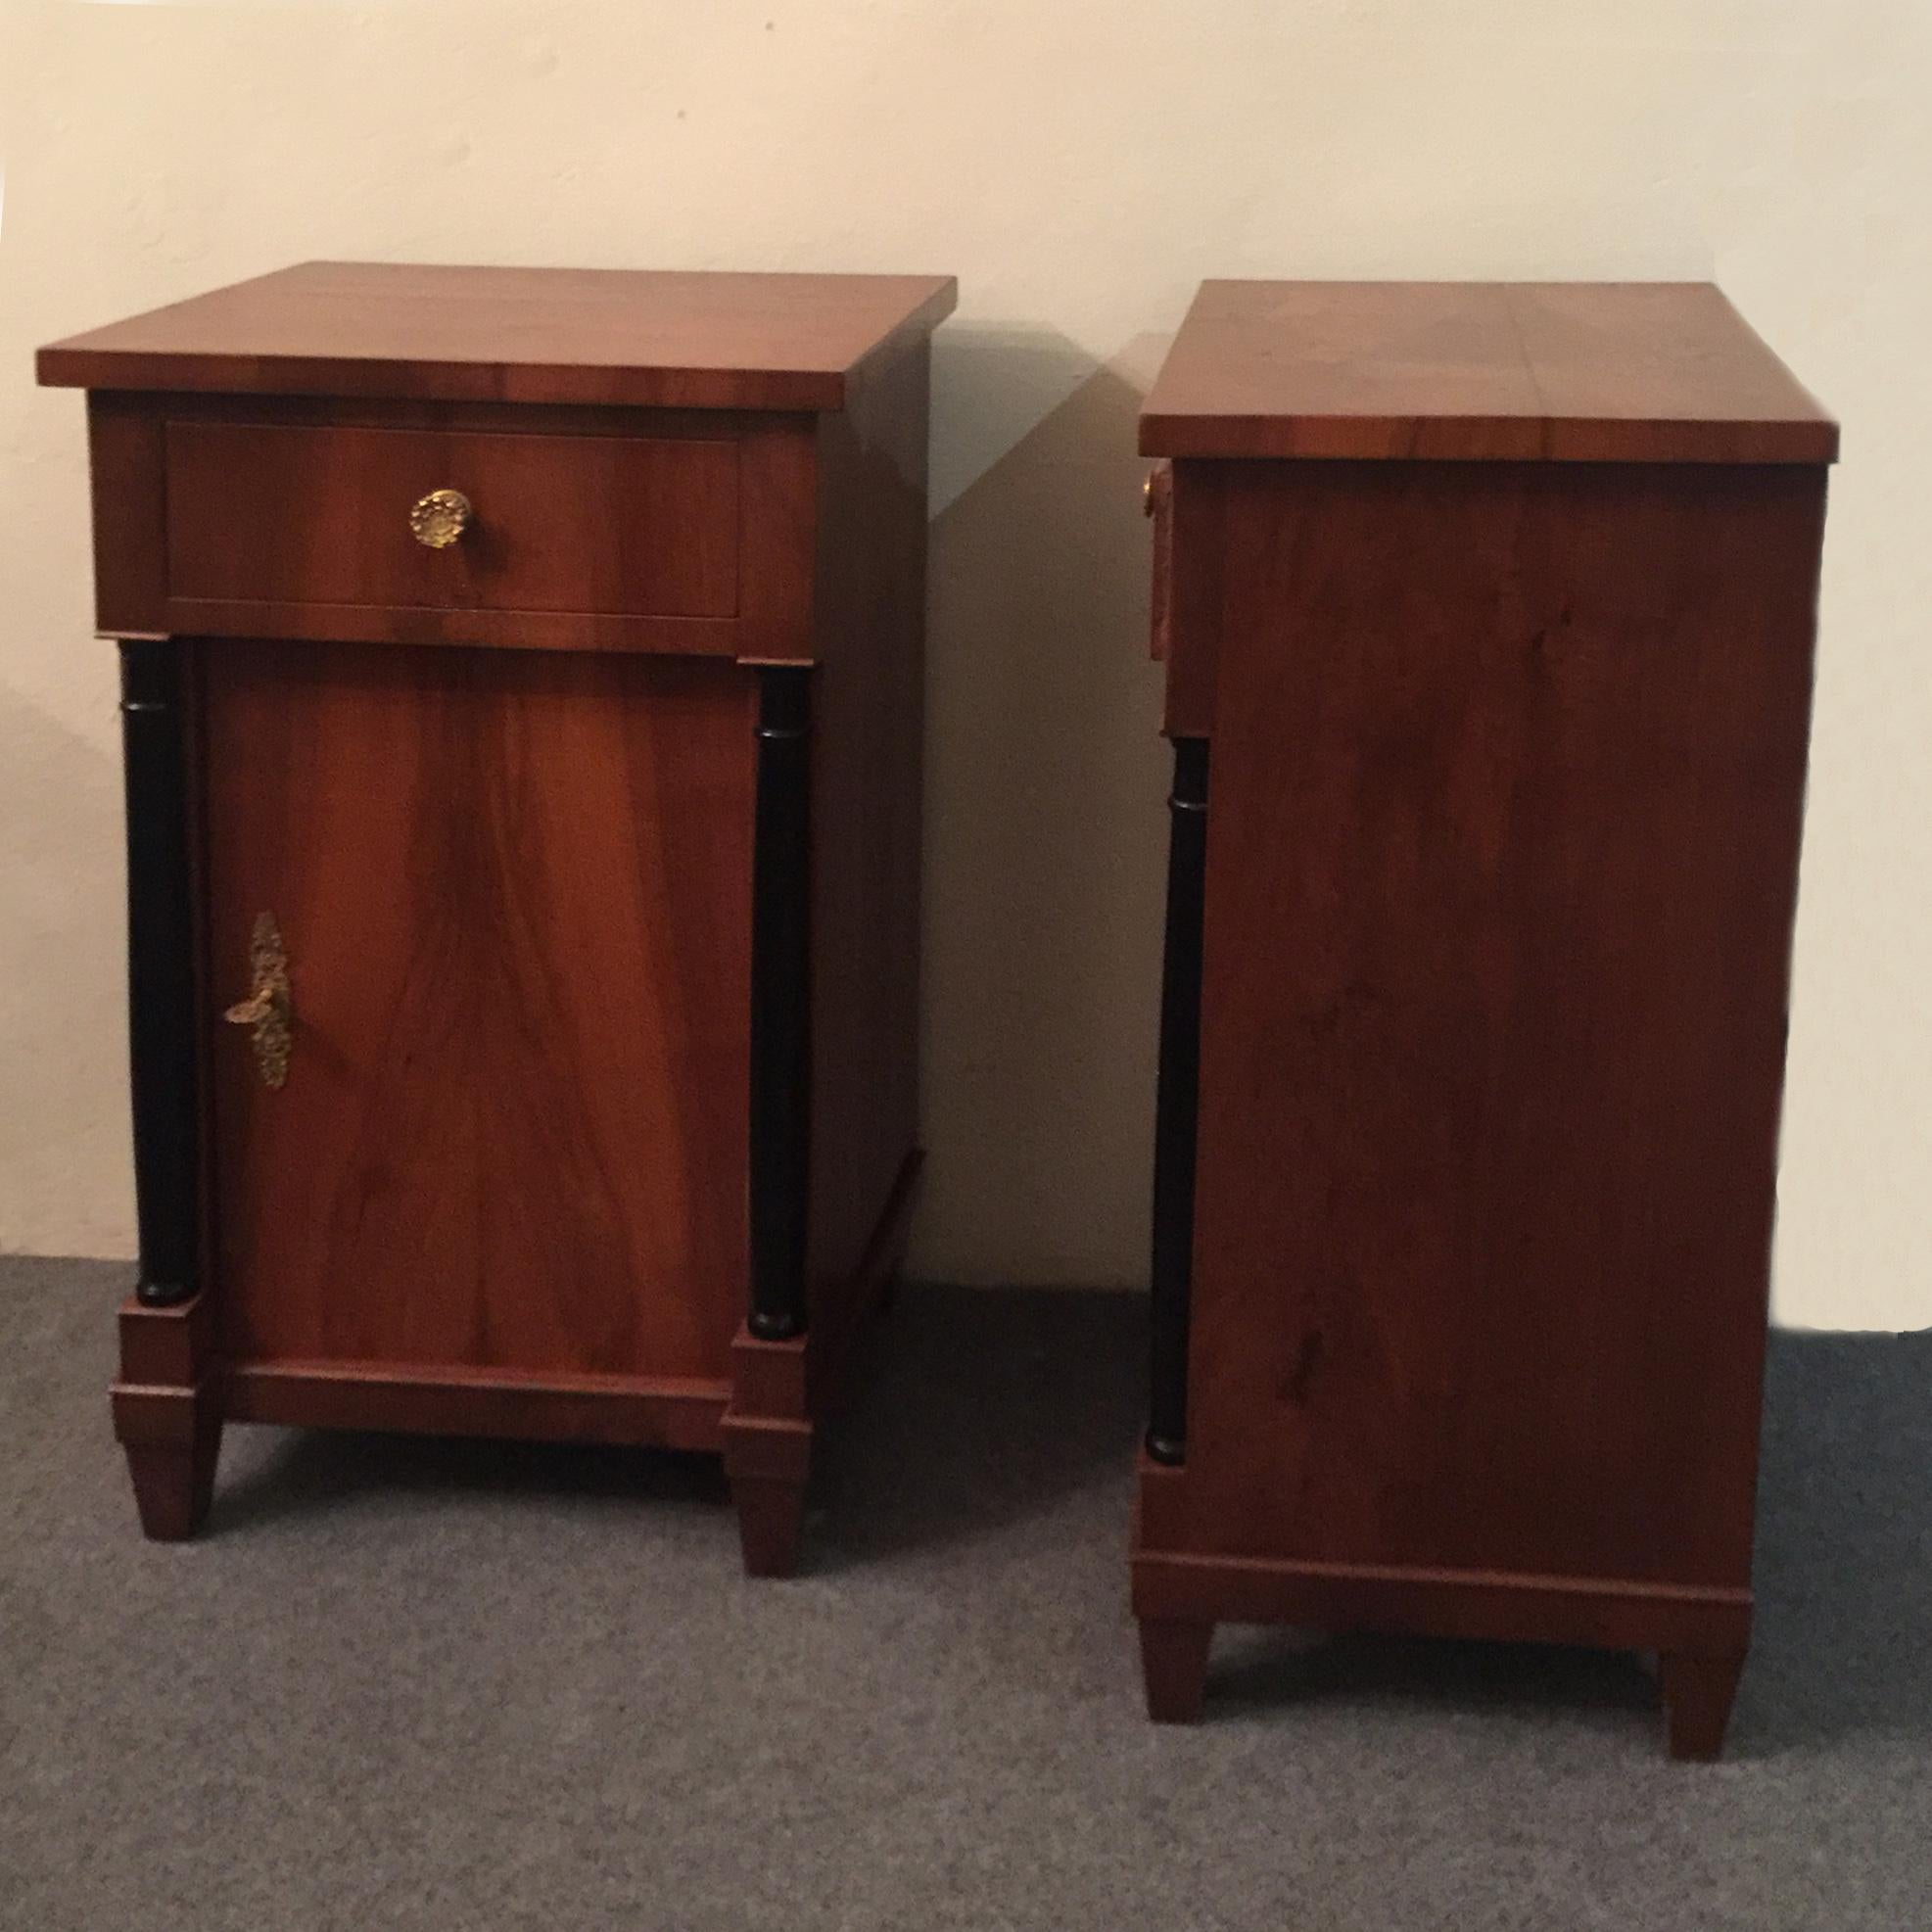 Nutwood Pair of Early 19th Century Italian Tuscany Empire Bedside Tables in Walnut